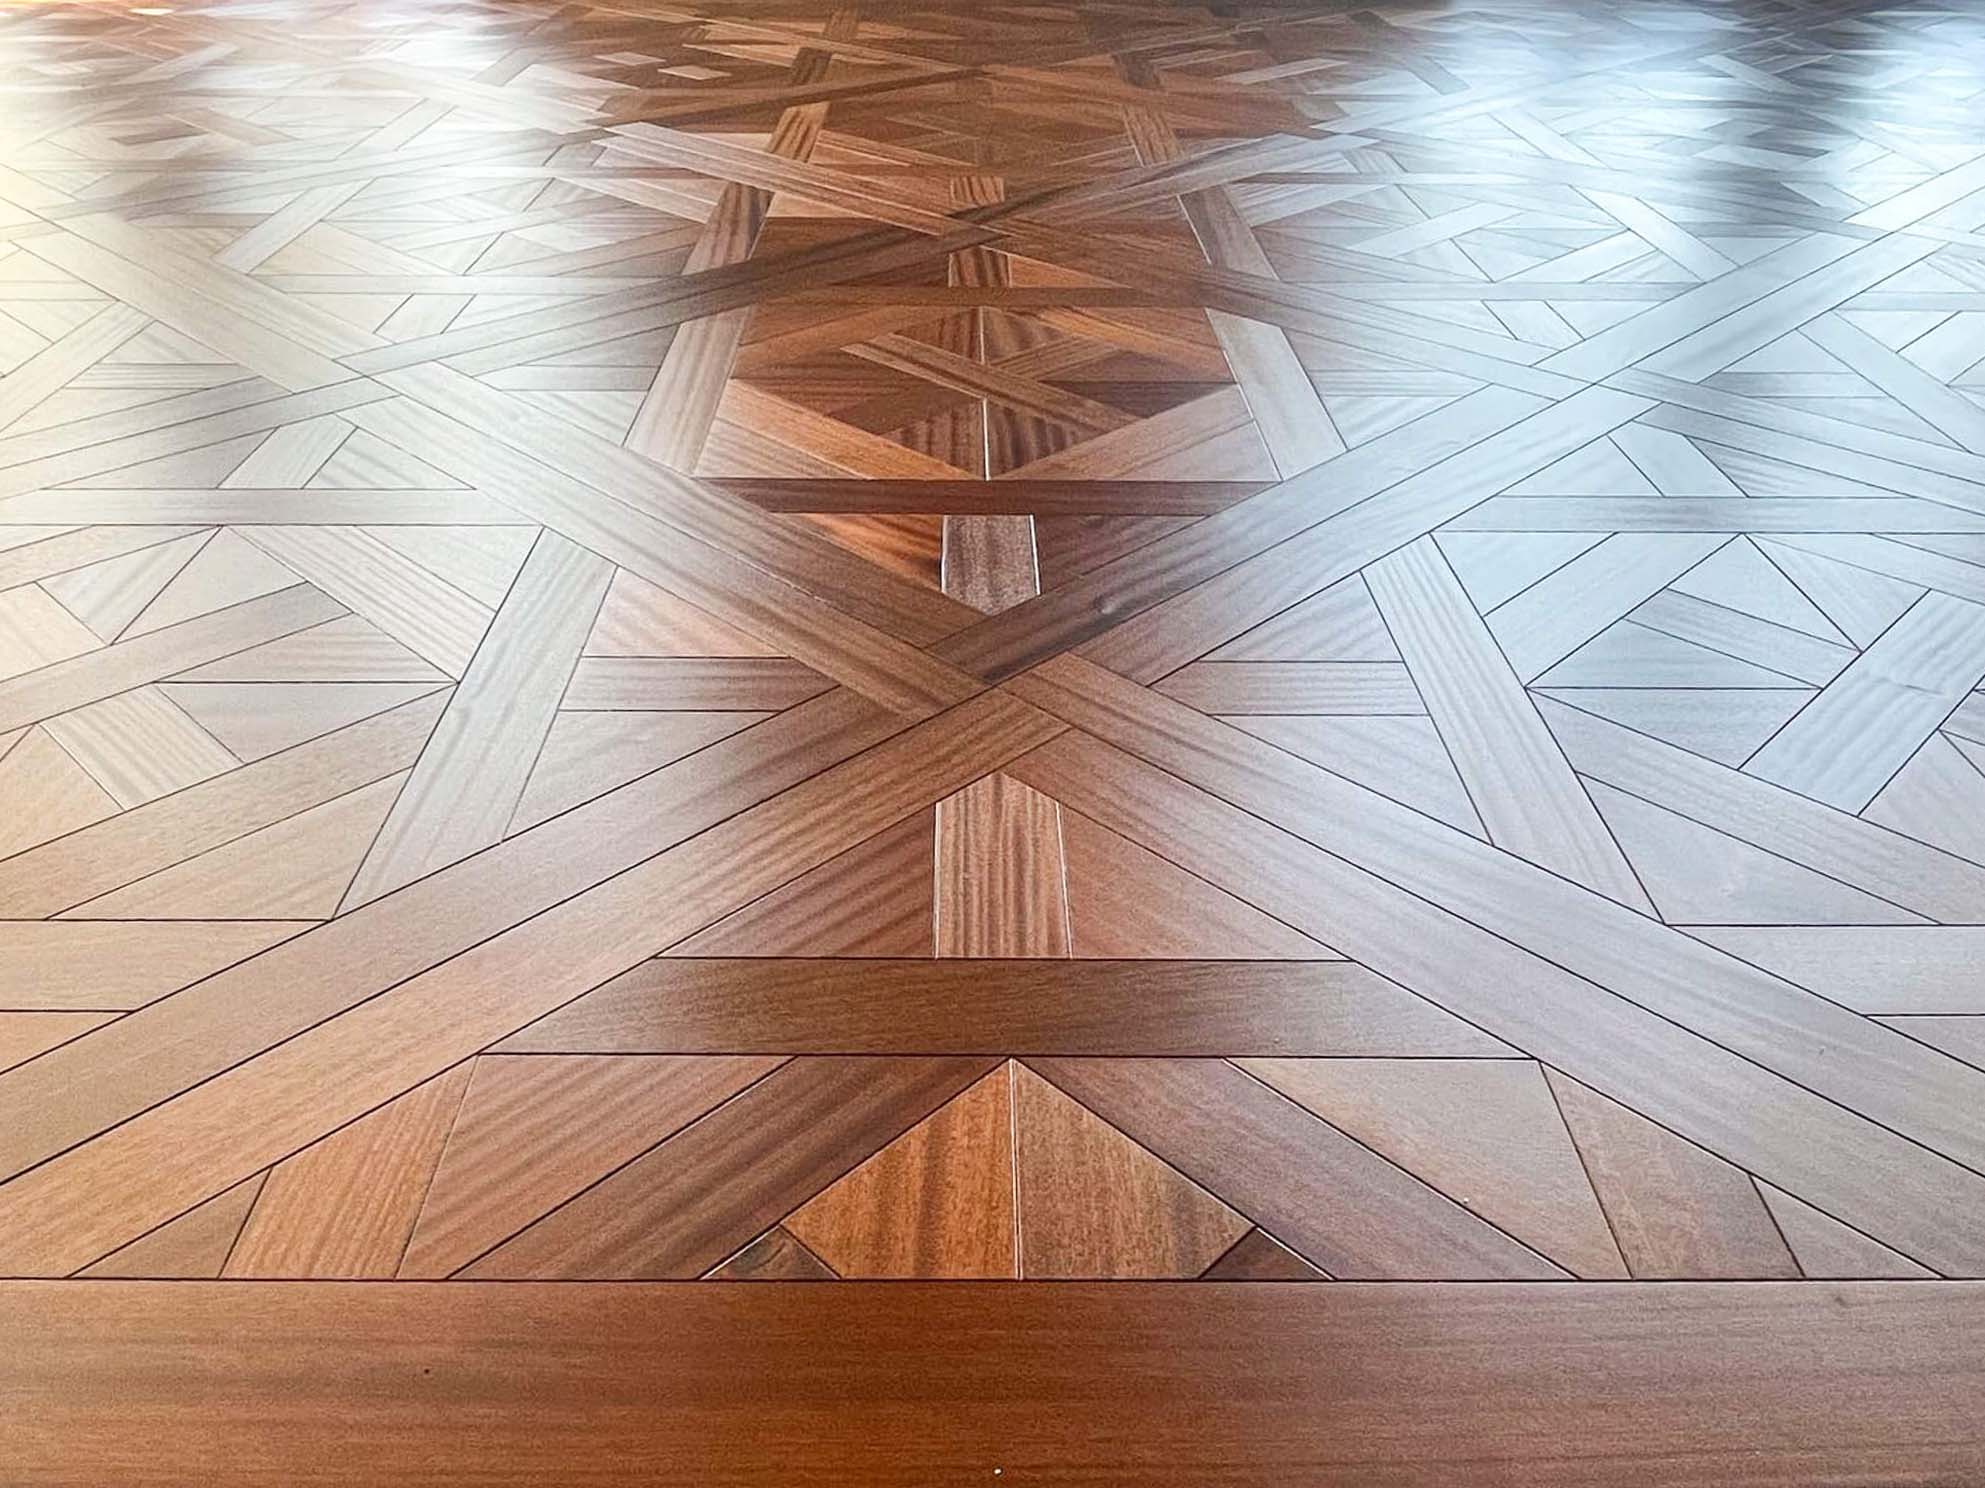 Sapele Bordeaux parquet flooring finished with Rubio Monocoat Hardwax Oil.